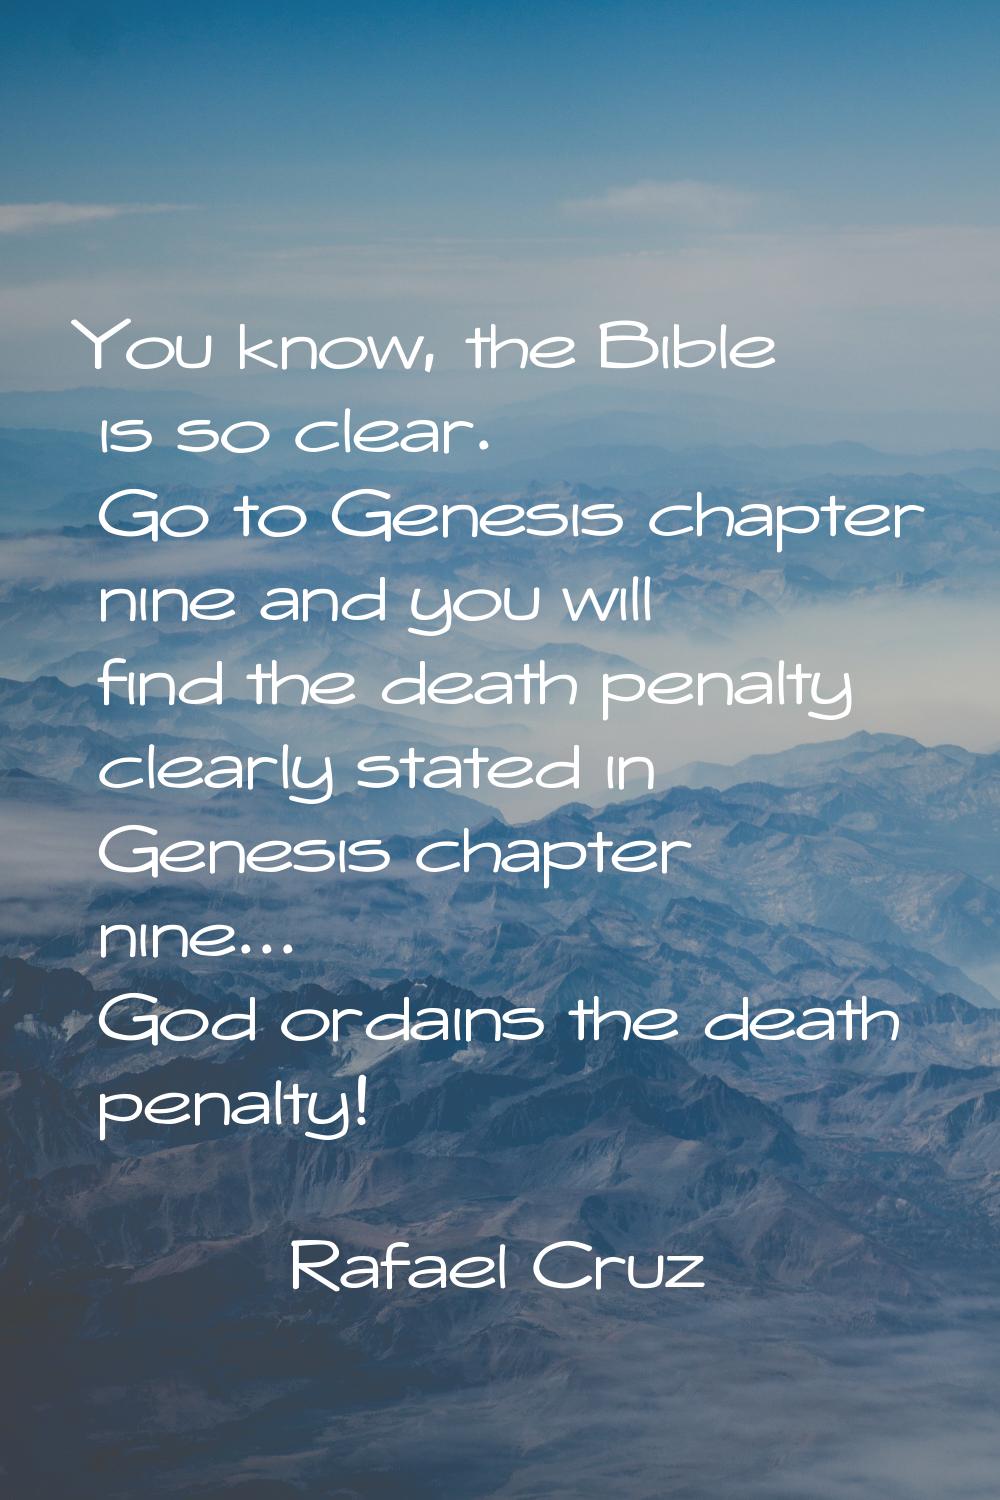 You know, the Bible is so clear. Go to Genesis chapter nine and you will find the death penalty cle